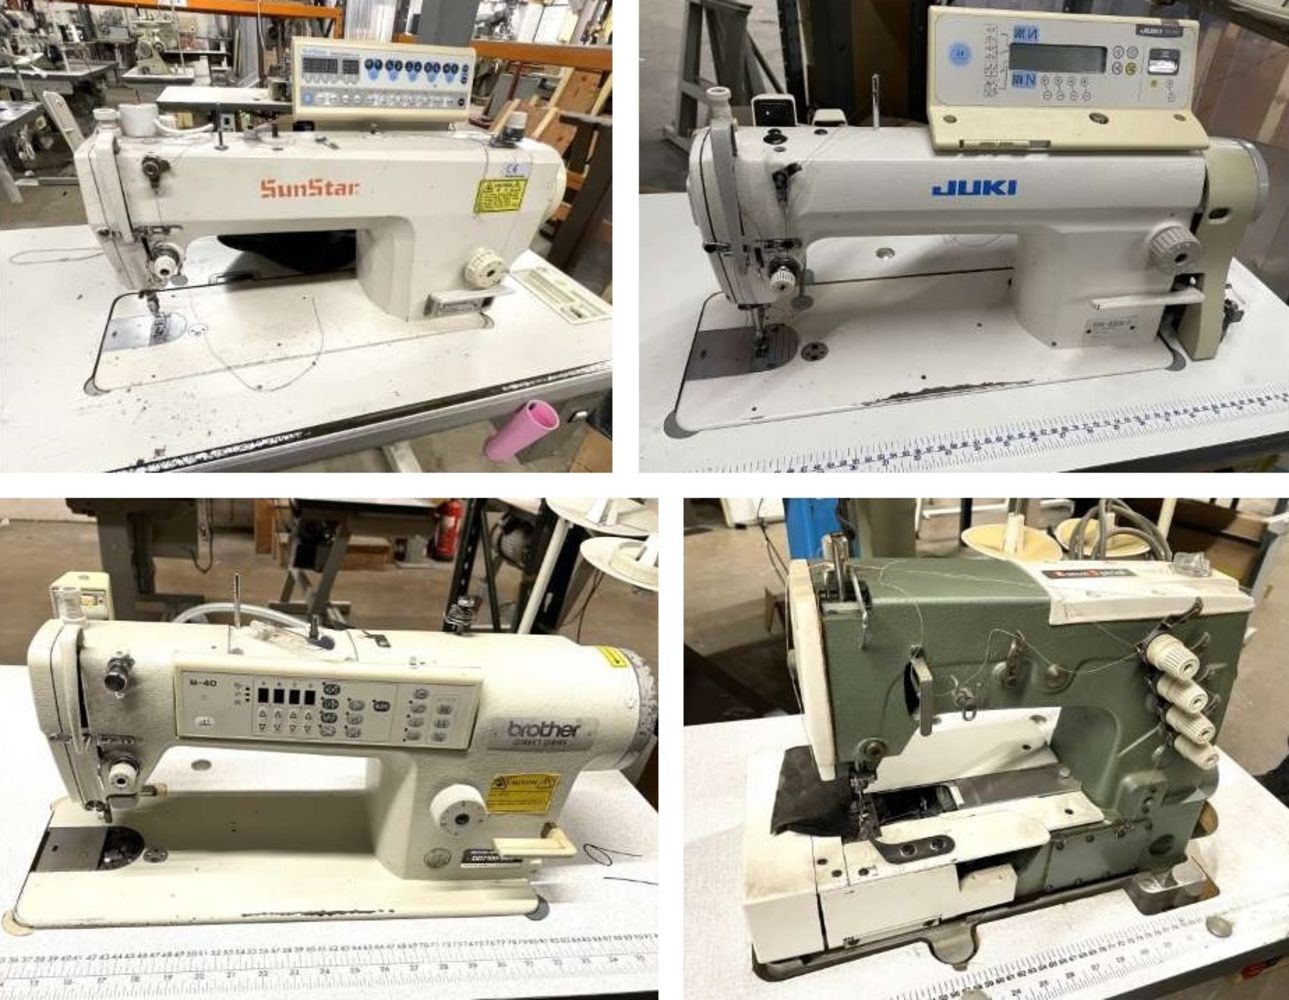 Contents of a Sewing Machine Stockist, Refurbisher & Repairer - Large Selection of Industrial Sewing Machines - Brother, Juki, Sunstar, Mauser